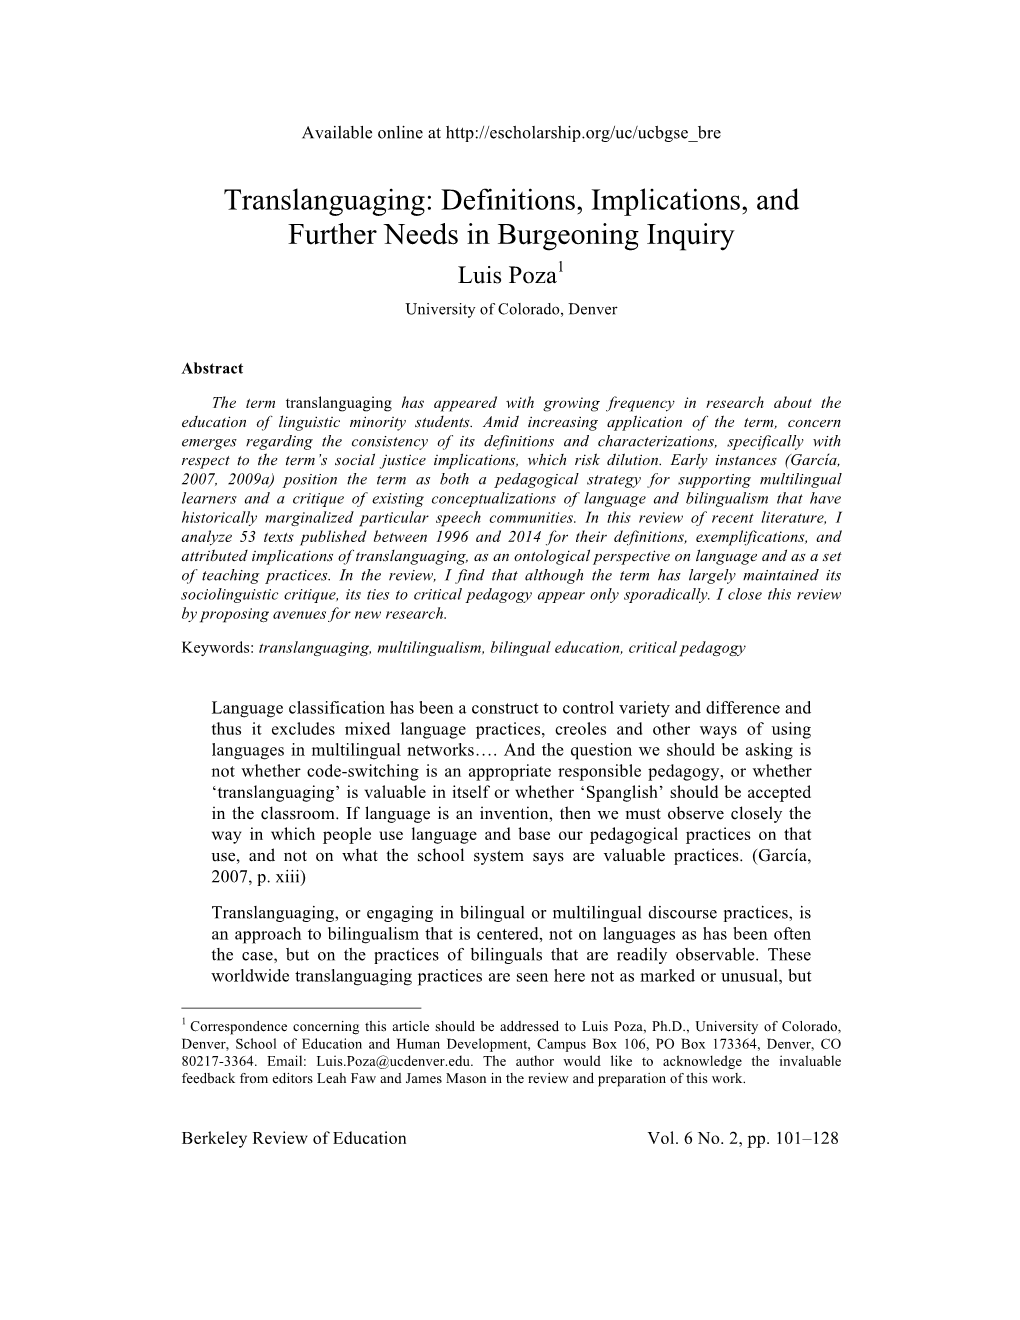 Translanguaging: Definitions, Implications, and Further Needs in Burgeoning Inquiry Luis Poza1 University of Colorado, Denver